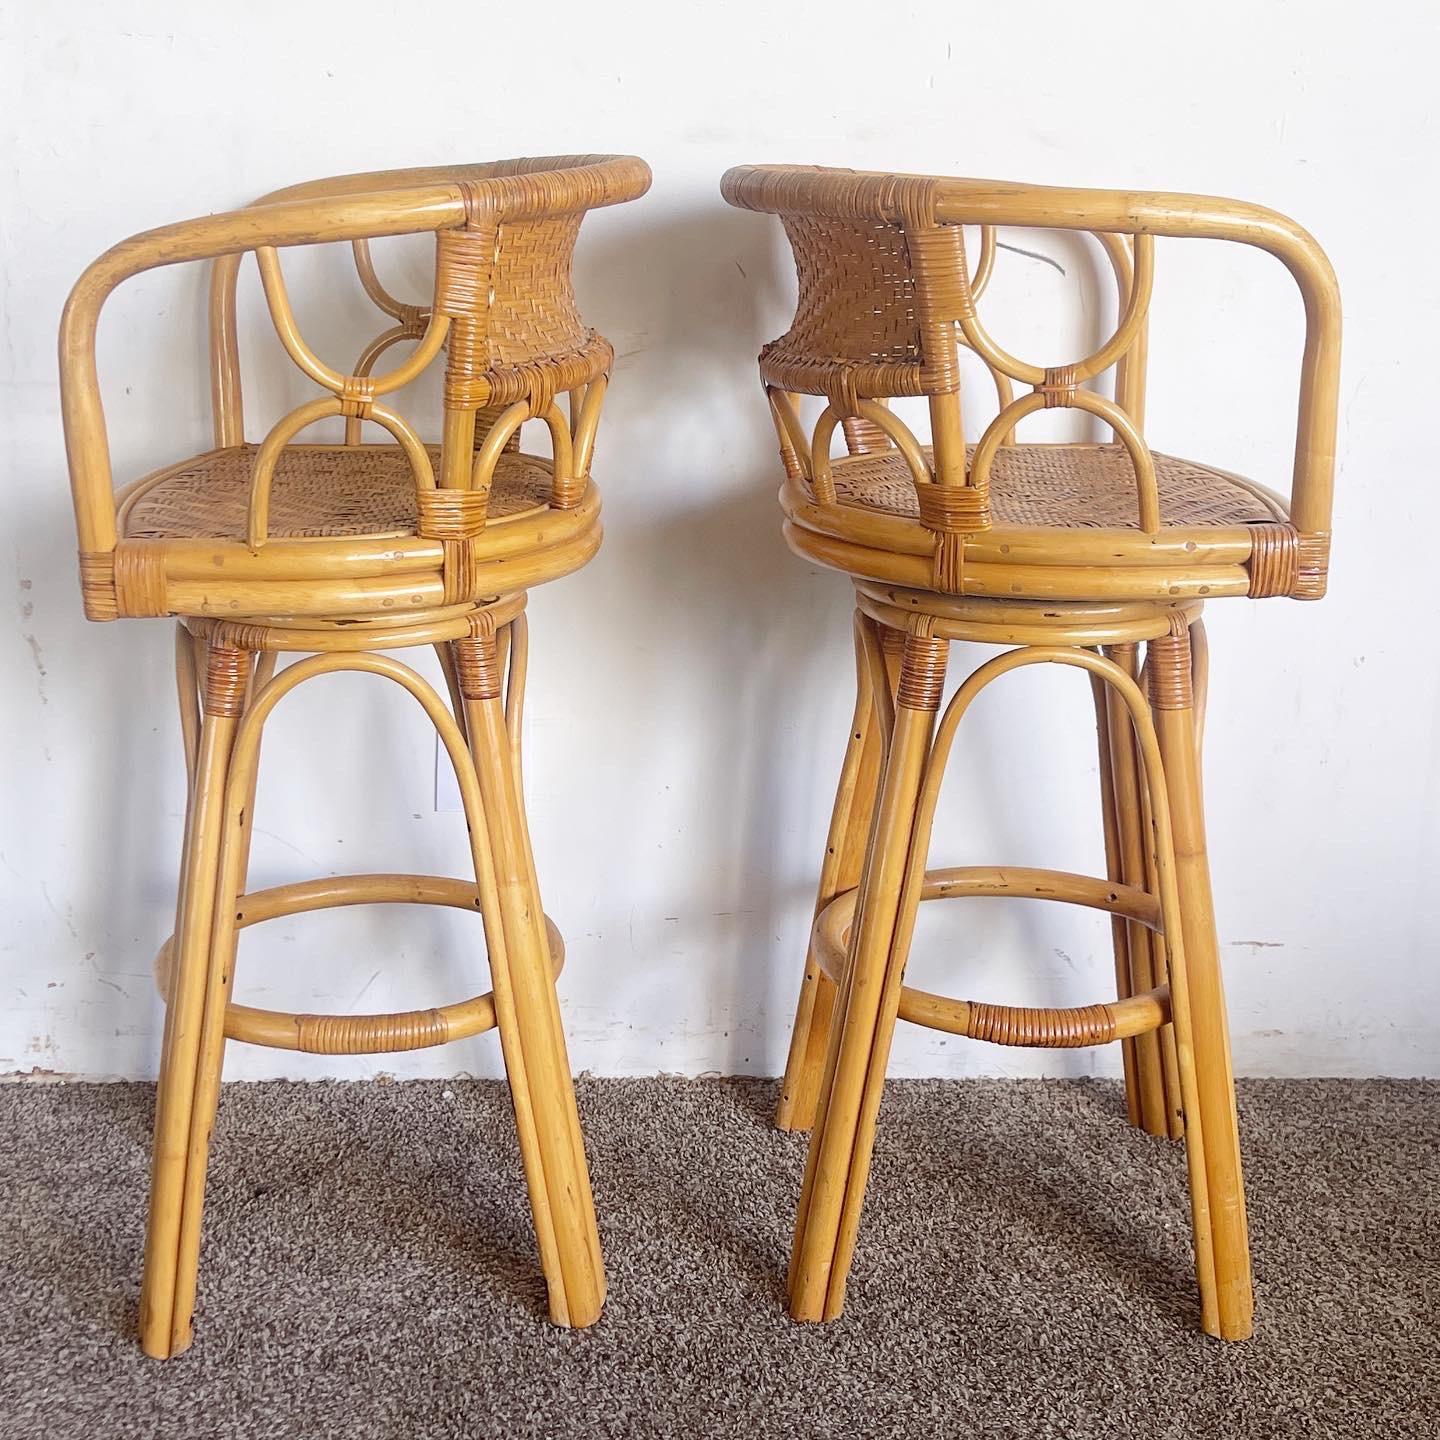 Boho Chick Bamboo Rattan and Wicker Swivel Stools - a Pair In Good Condition For Sale In Delray Beach, FL